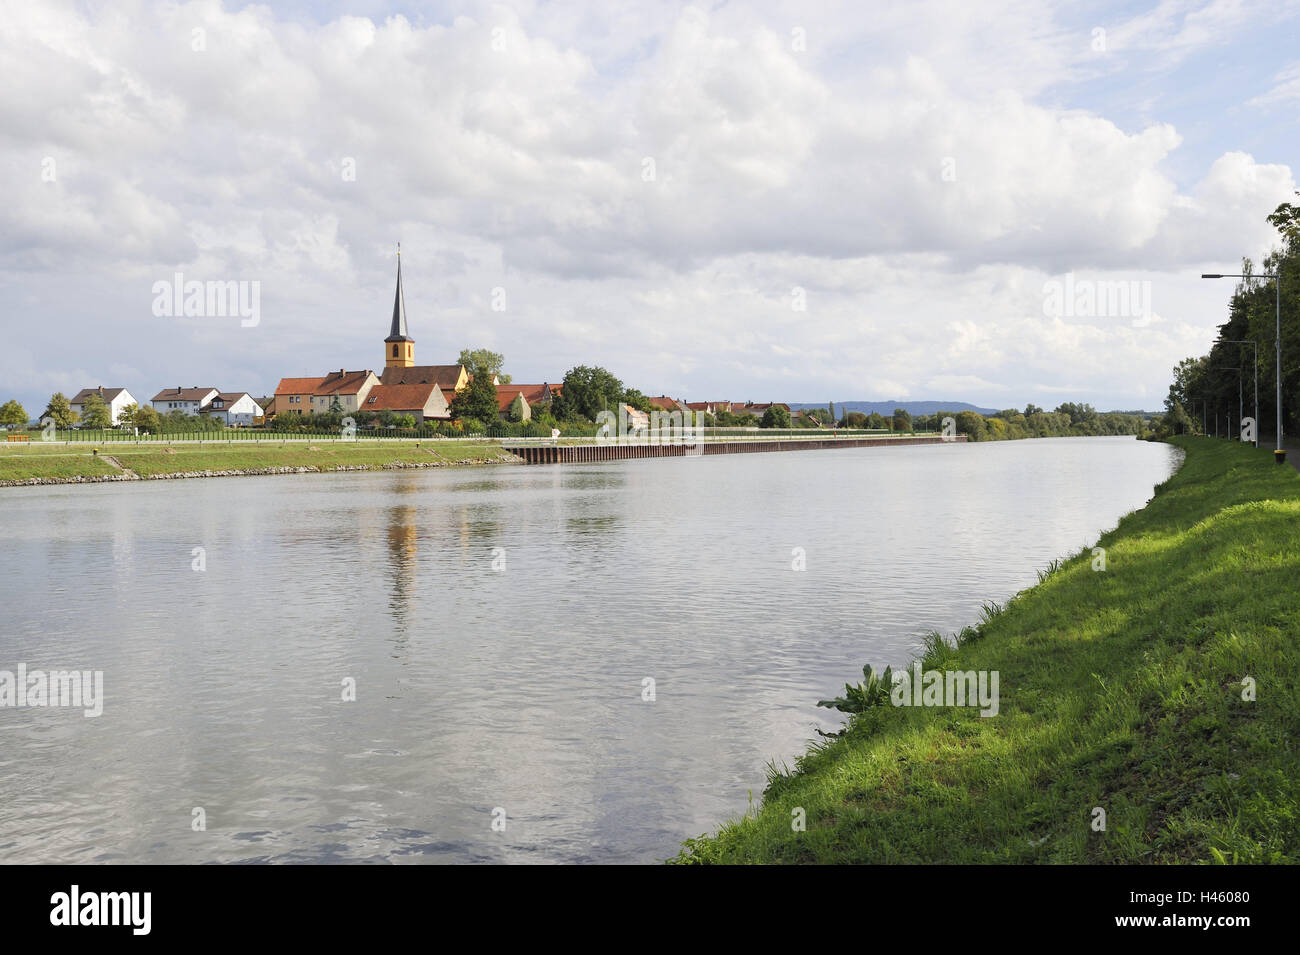 Germany, Bavaria, Gerlachshausen., village view, Main channel, Lower Franconia, village, church, steeple, Christianity, religion, faith, church, houses, residential houses, culture, landmark, water, channel, water way, landing stage, ship traffic, cloudy sky, Stock Photo